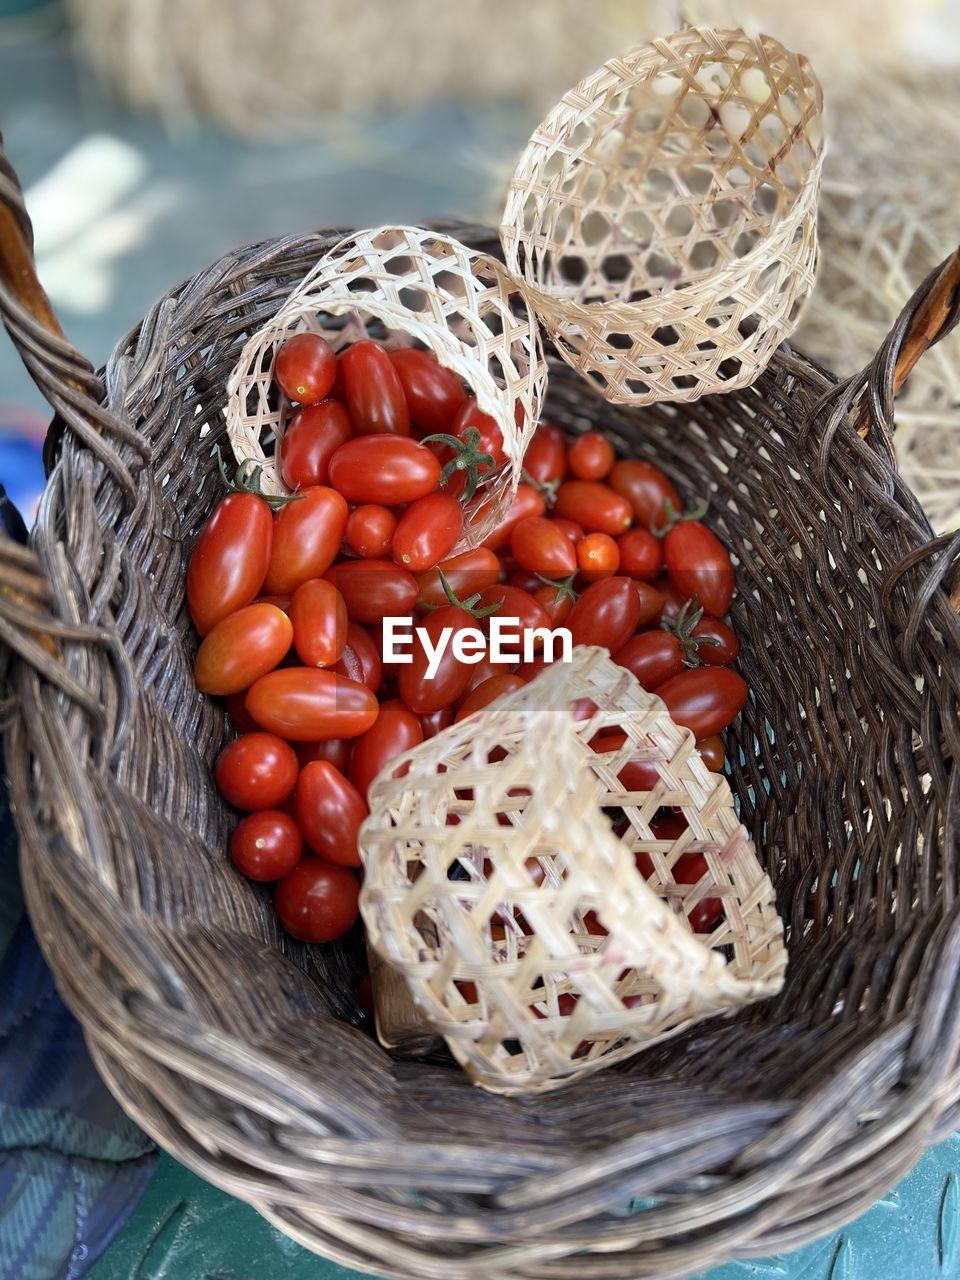 basket, food, food and drink, container, healthy eating, fruit, wicker, freshness, produce, wellbeing, no people, vegetable, tomato, red